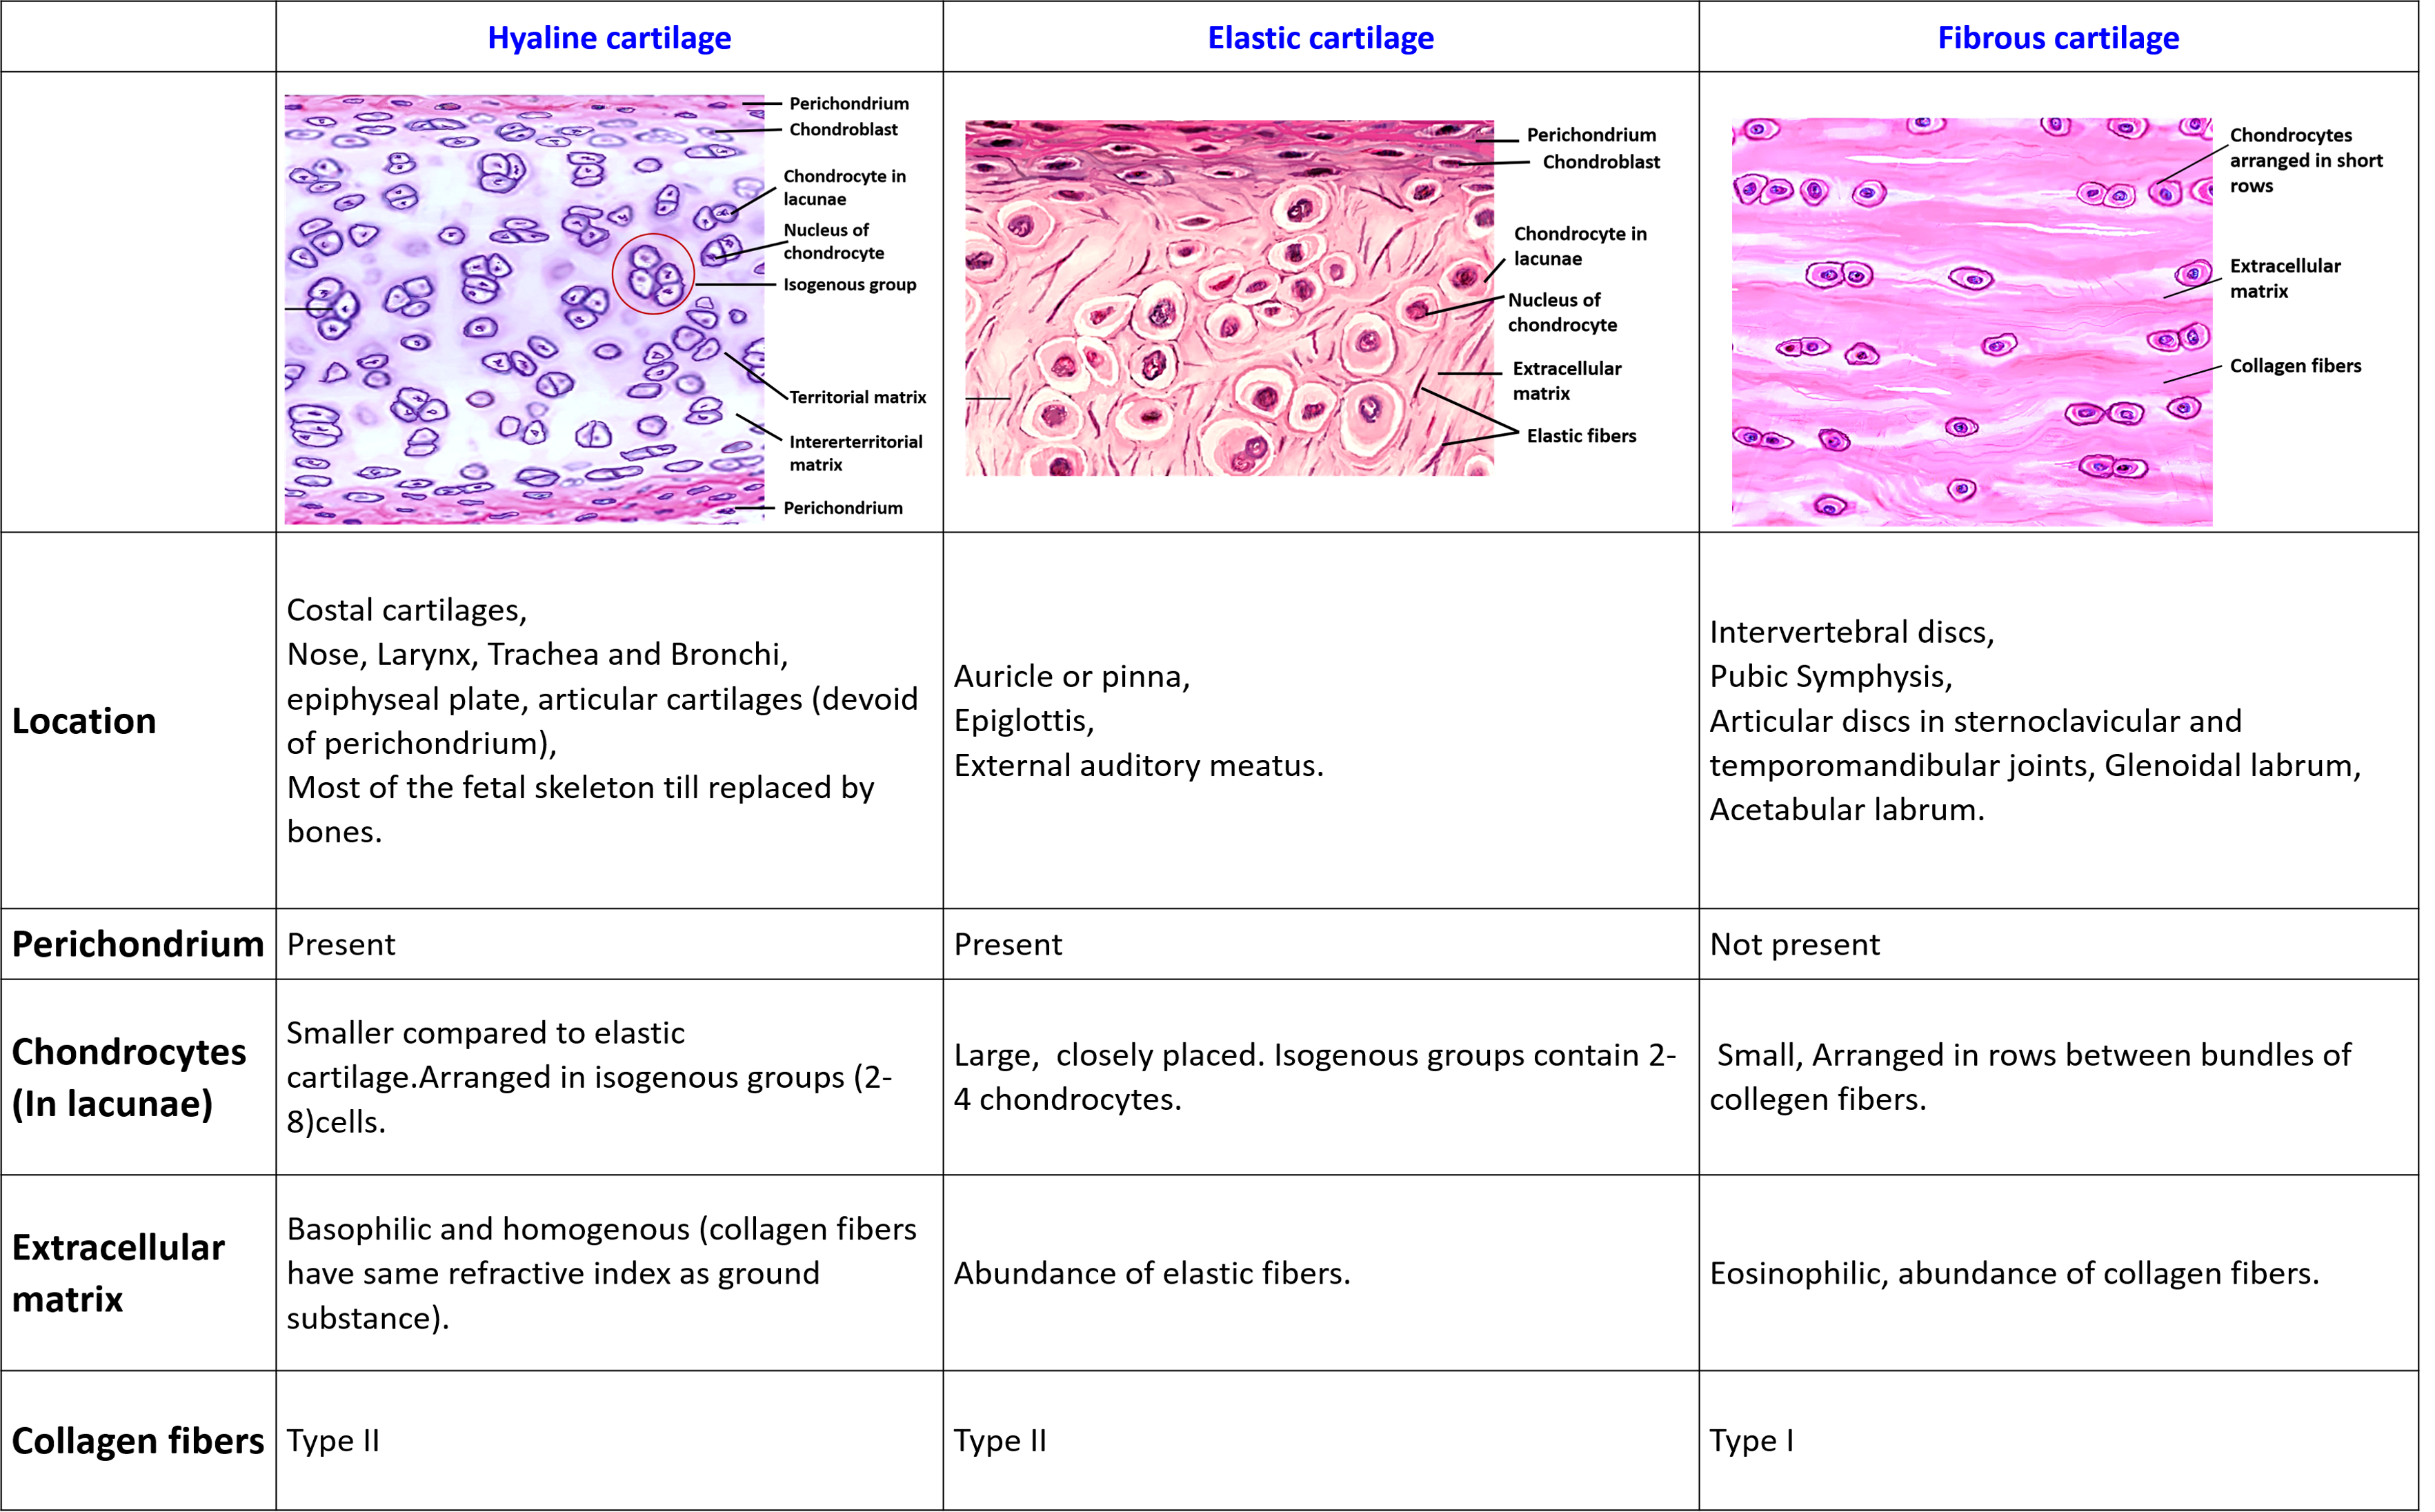 Differences between hyaline, elastic and fibrous cartilage